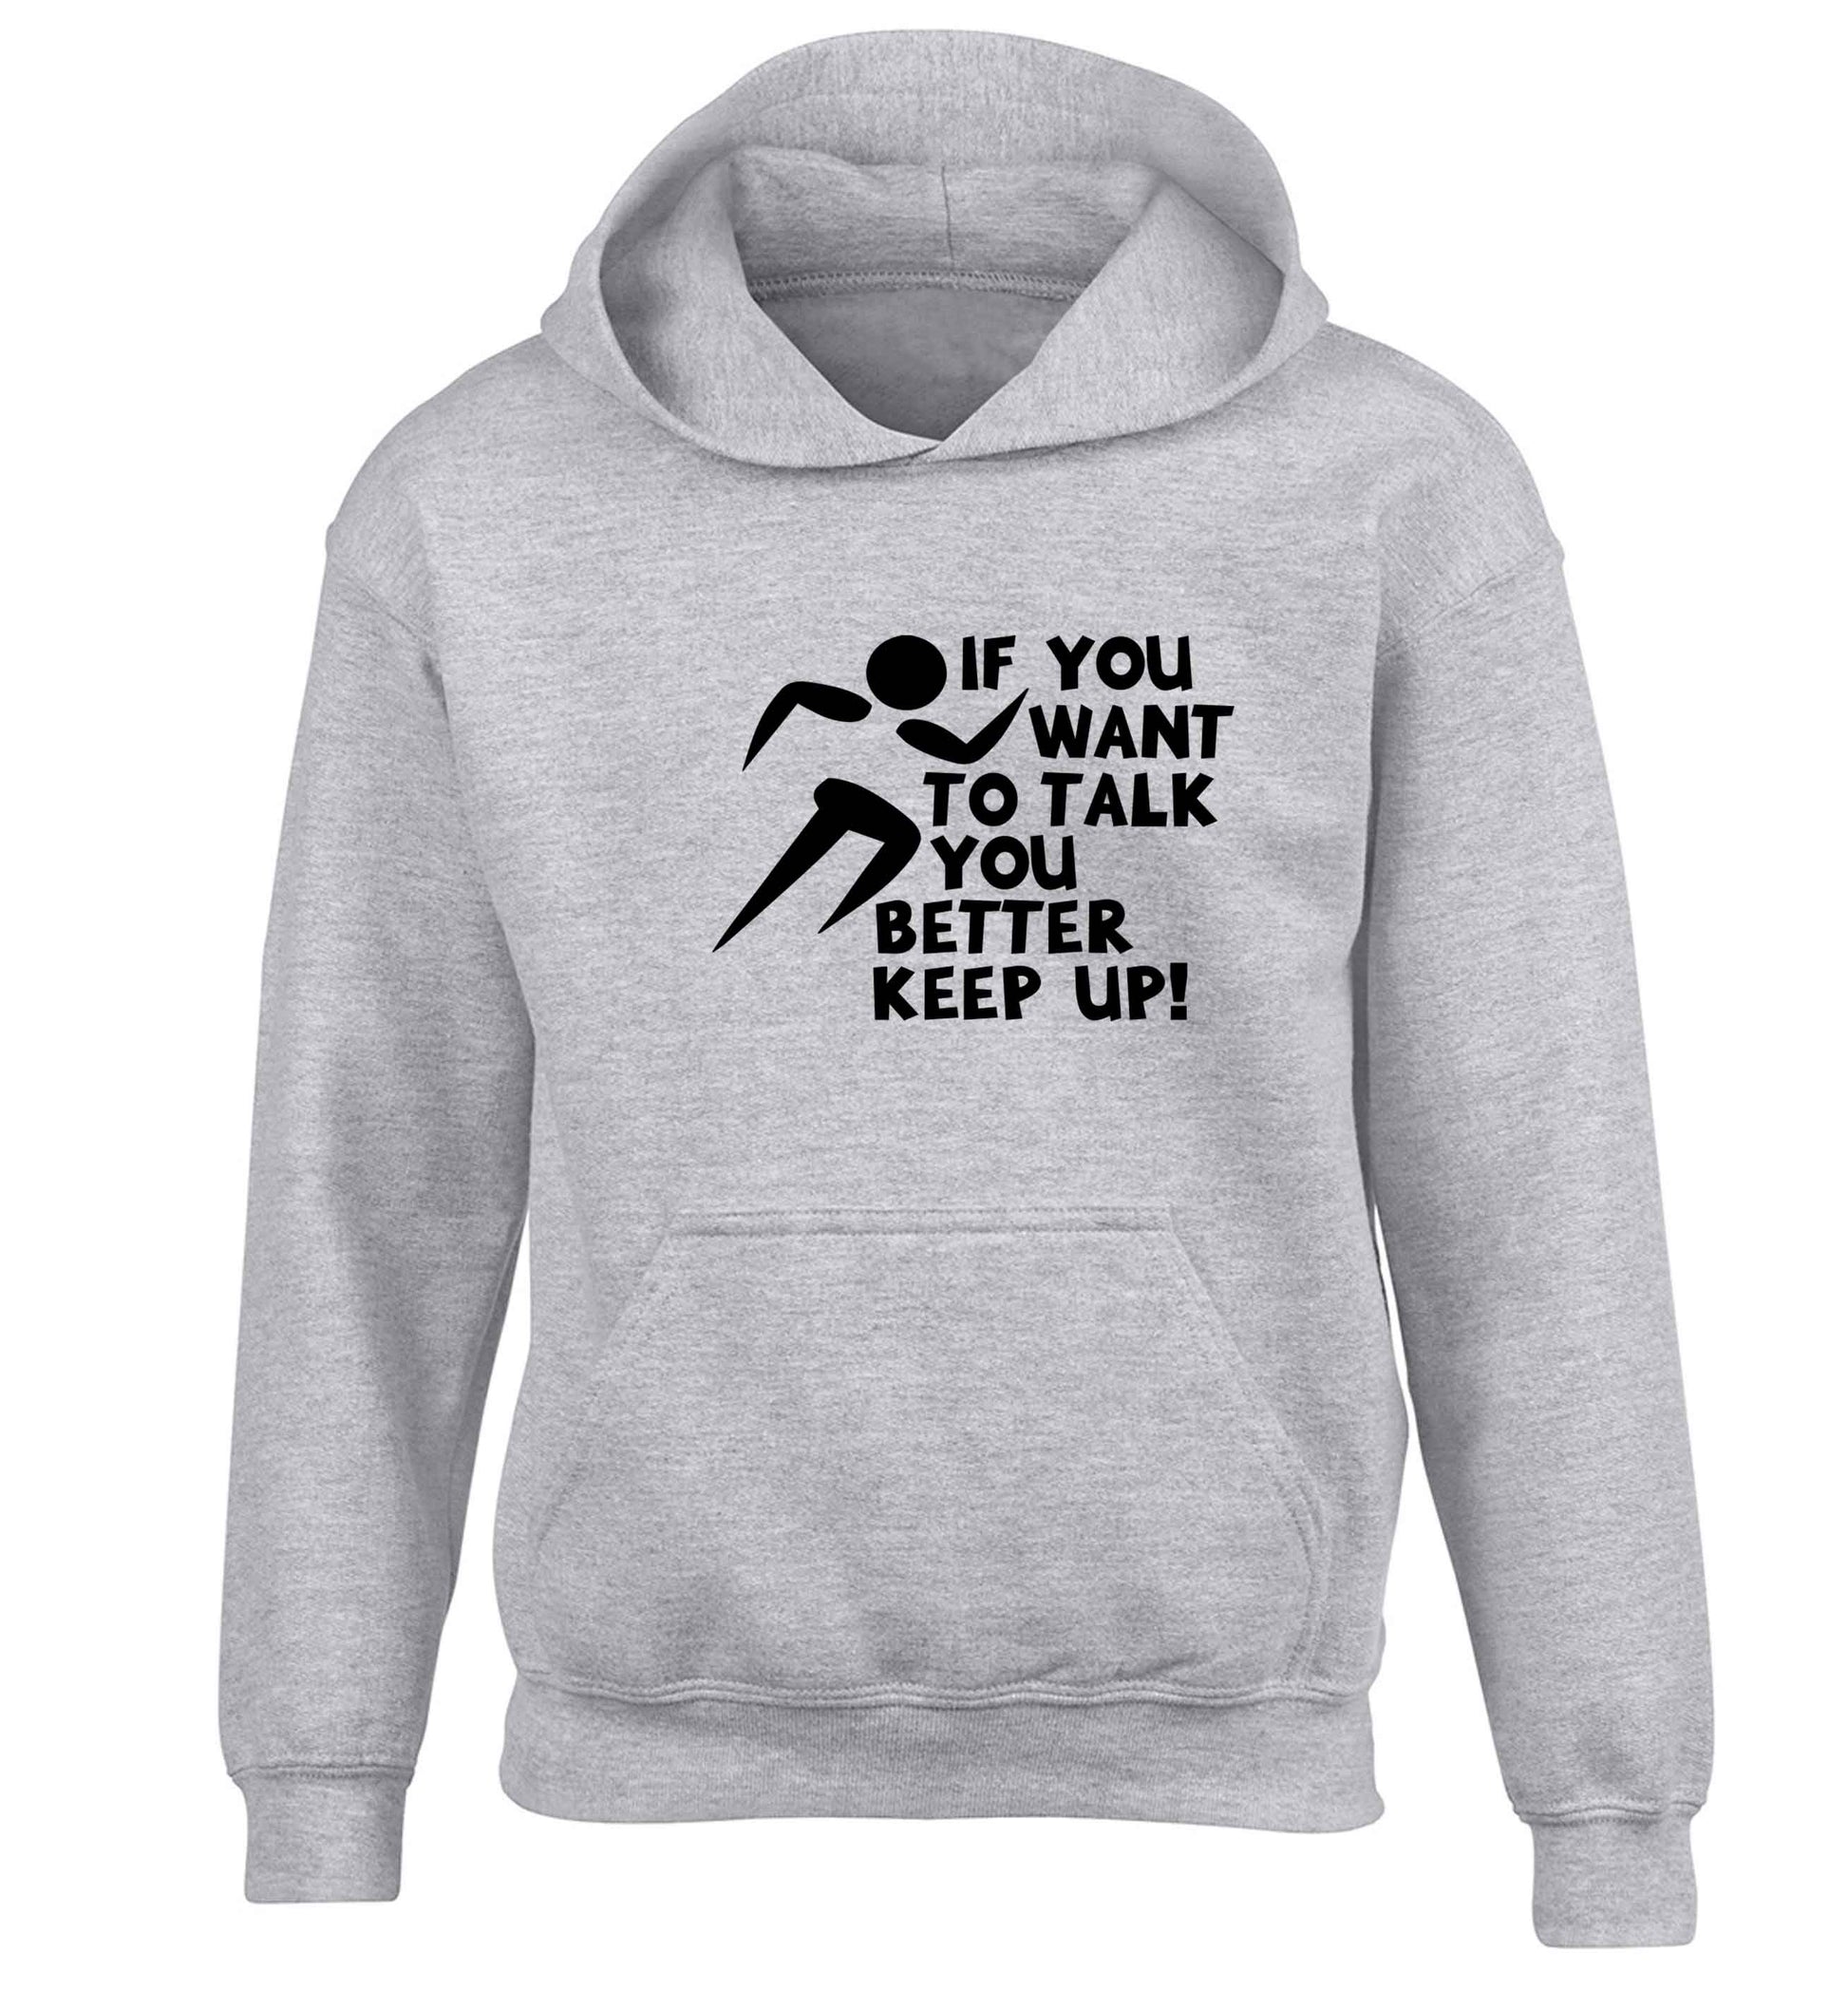 If you want to talk you better keep up! children's grey hoodie 12-13 Years